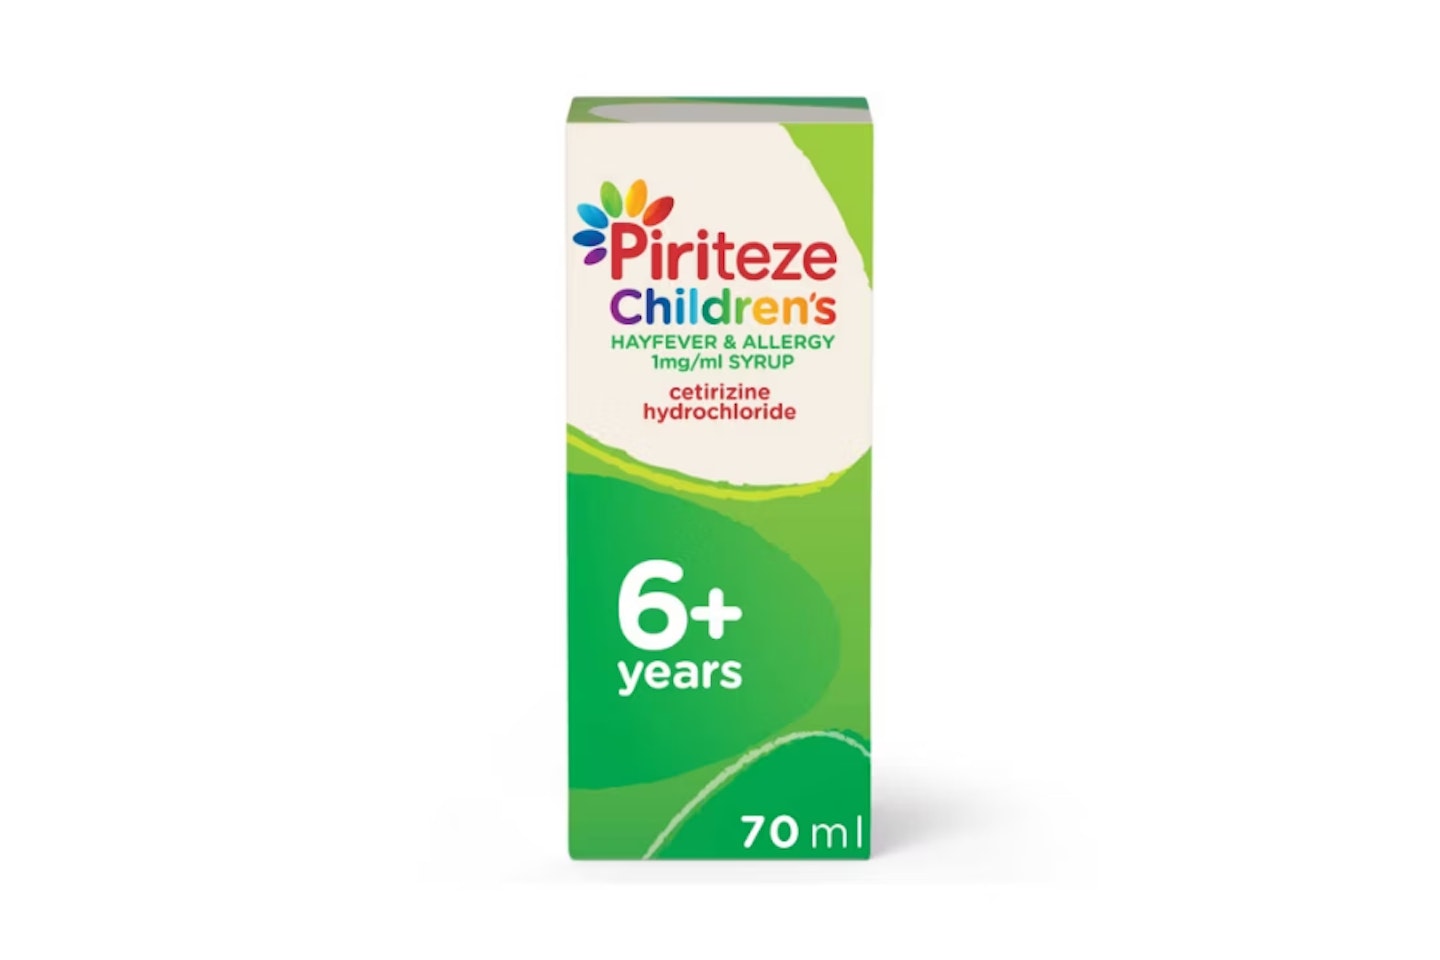 Piriteze Allergy and Hayfever Syrup